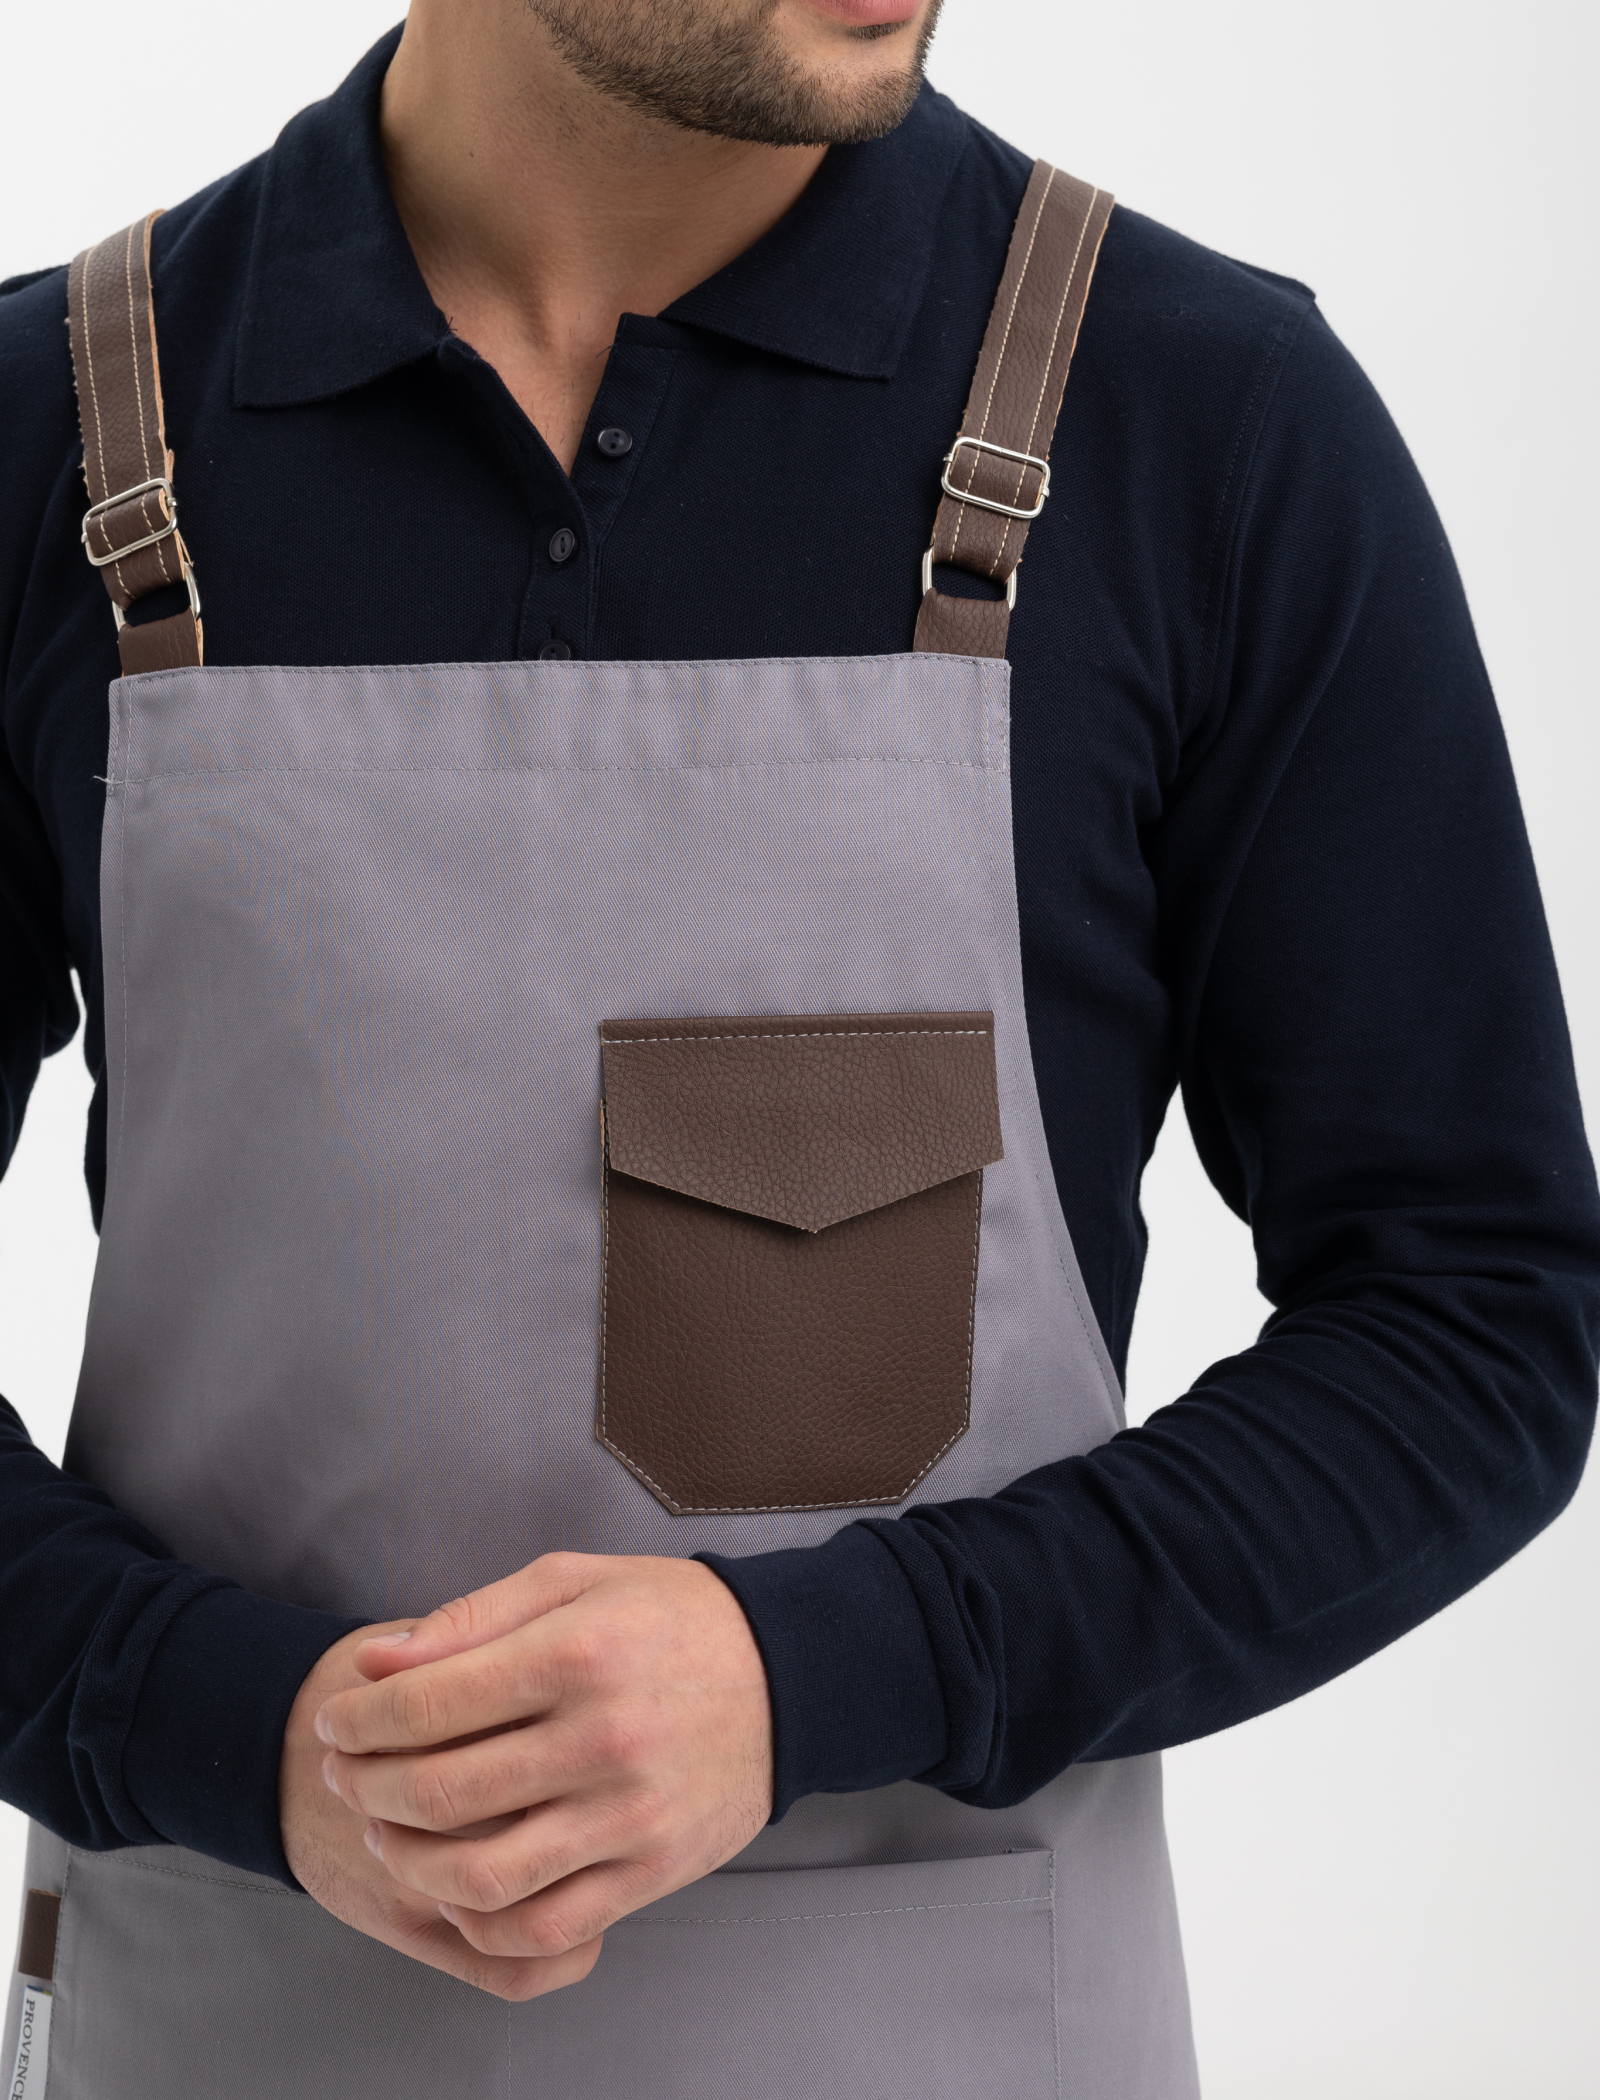 BIB APRON WITH ECO-LEATHER INSERTS